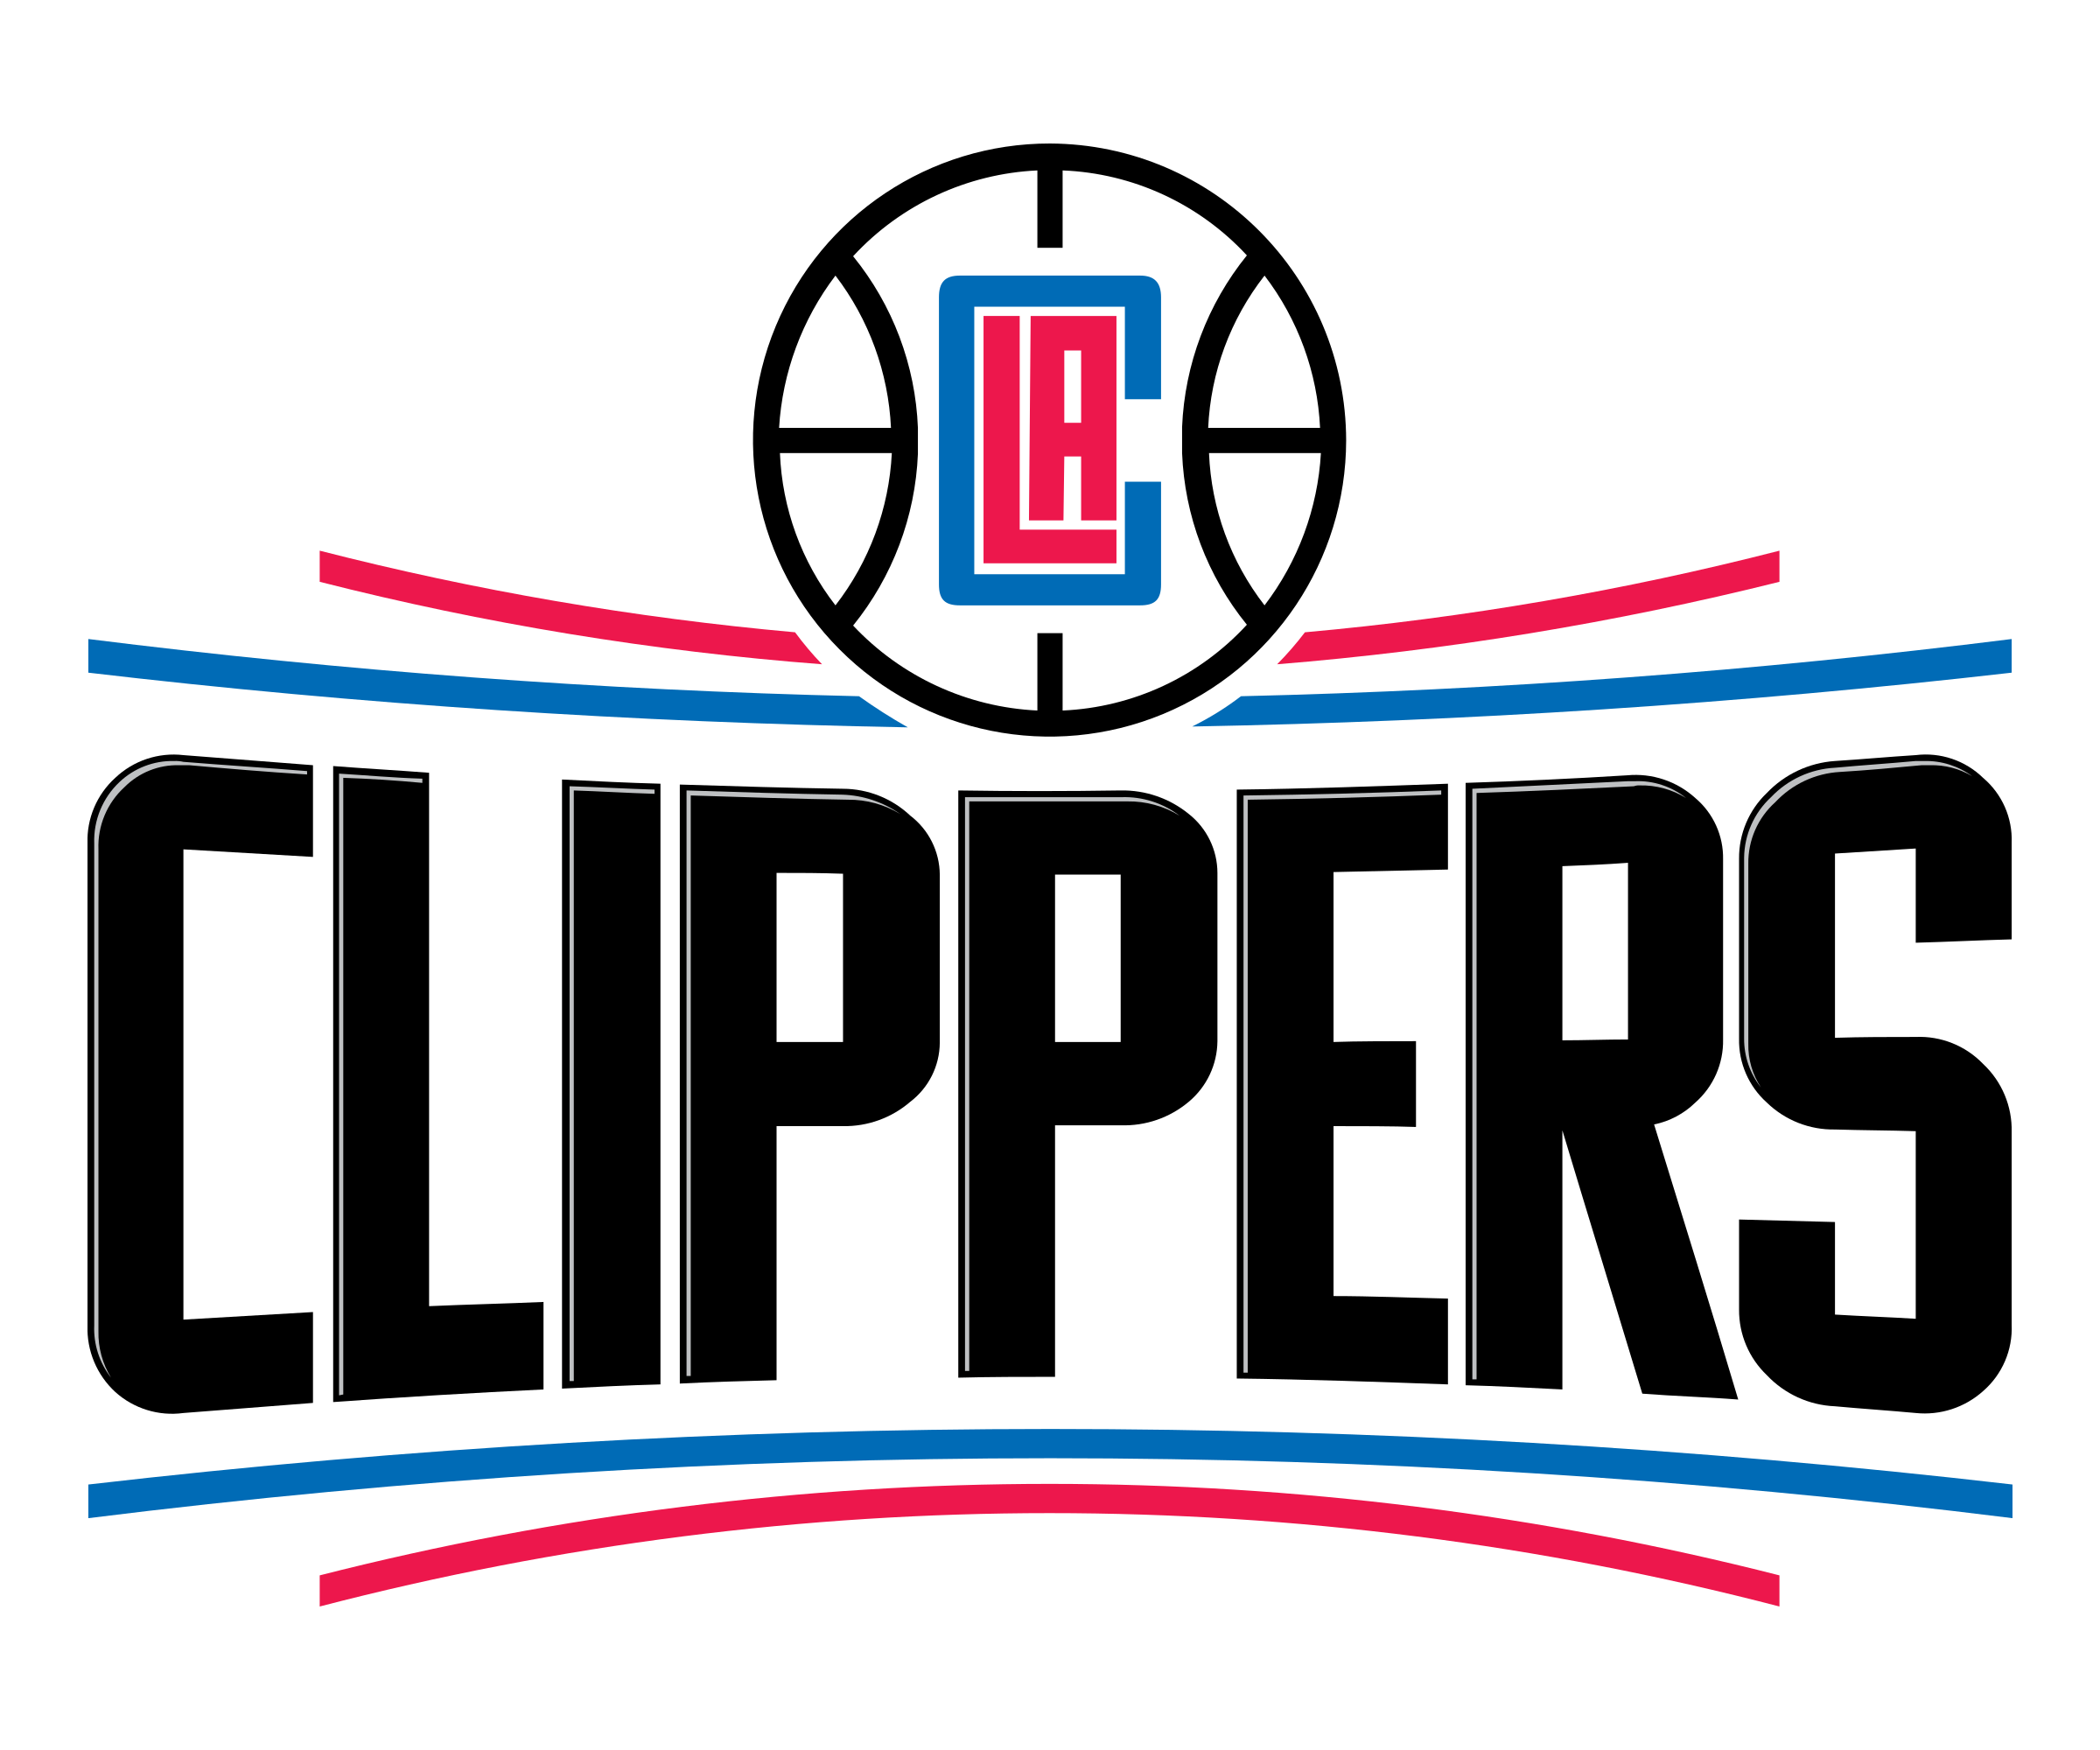 55-557909_los-angeles-clippers-logos-download-golden-state-warriors.png